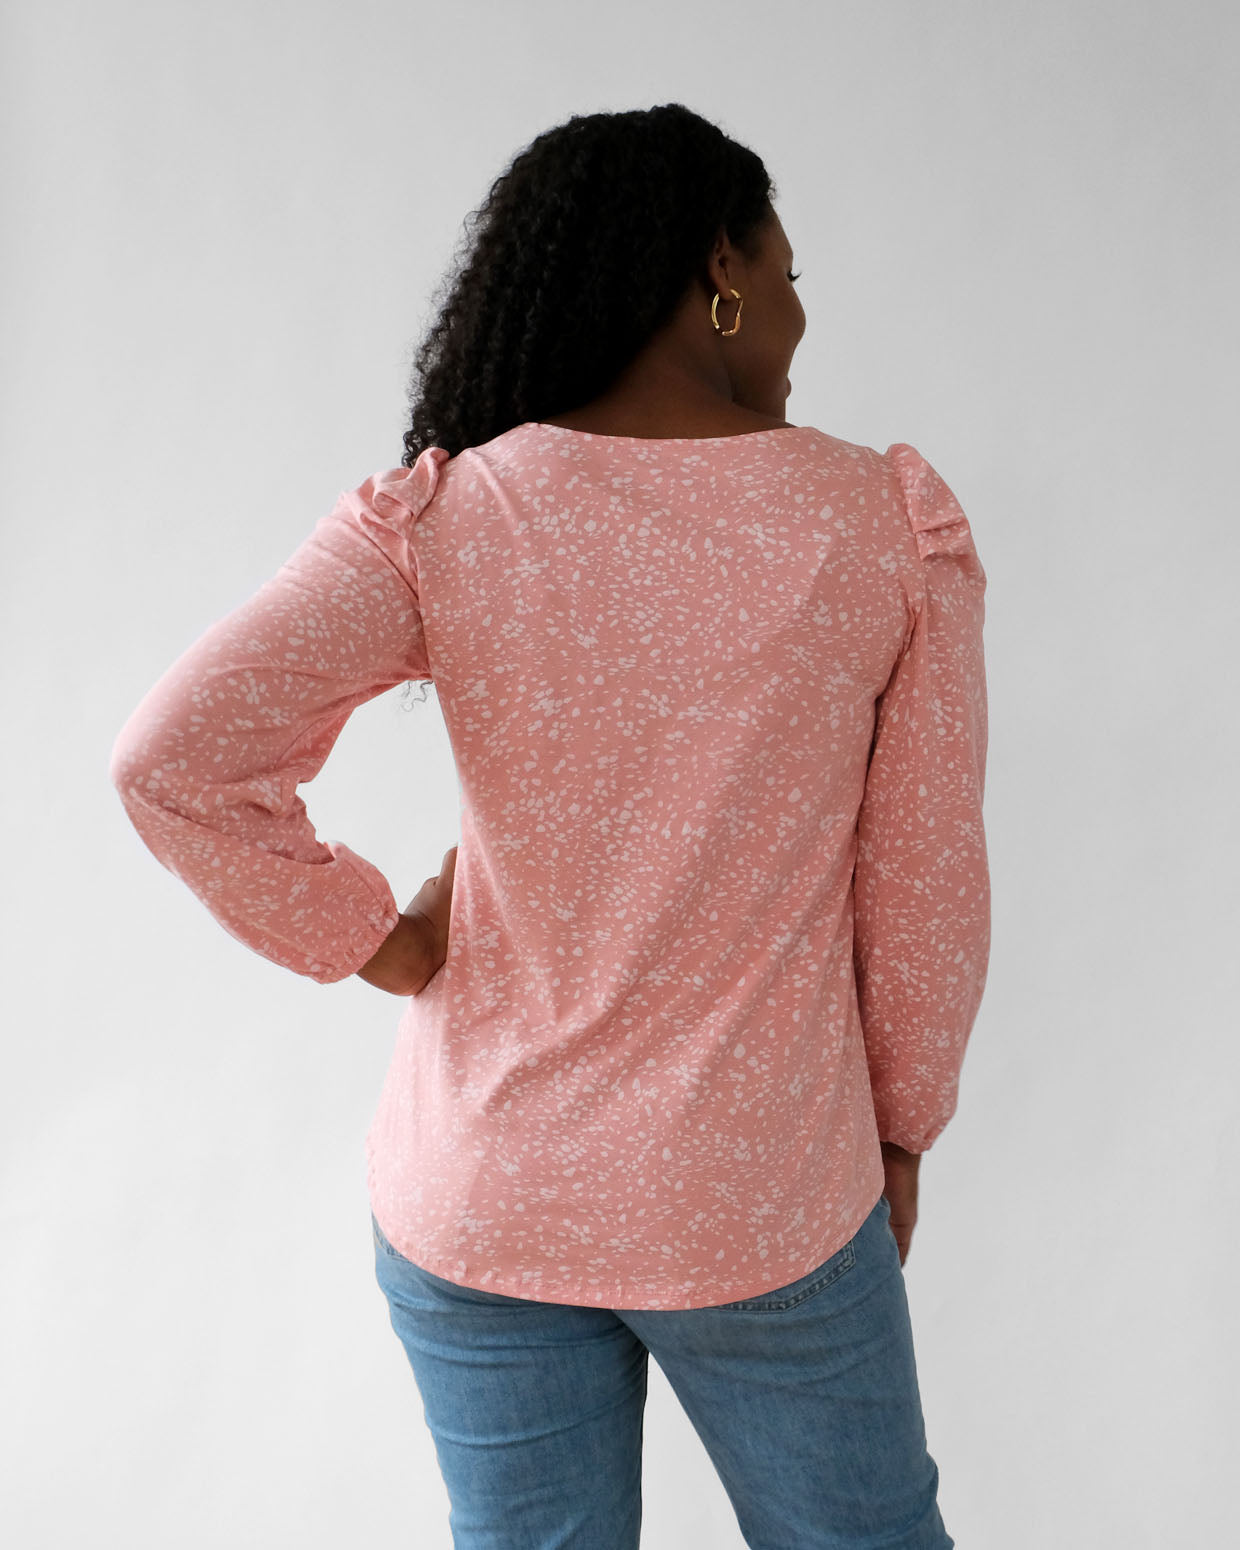 ATHENA printed top in Peach/White